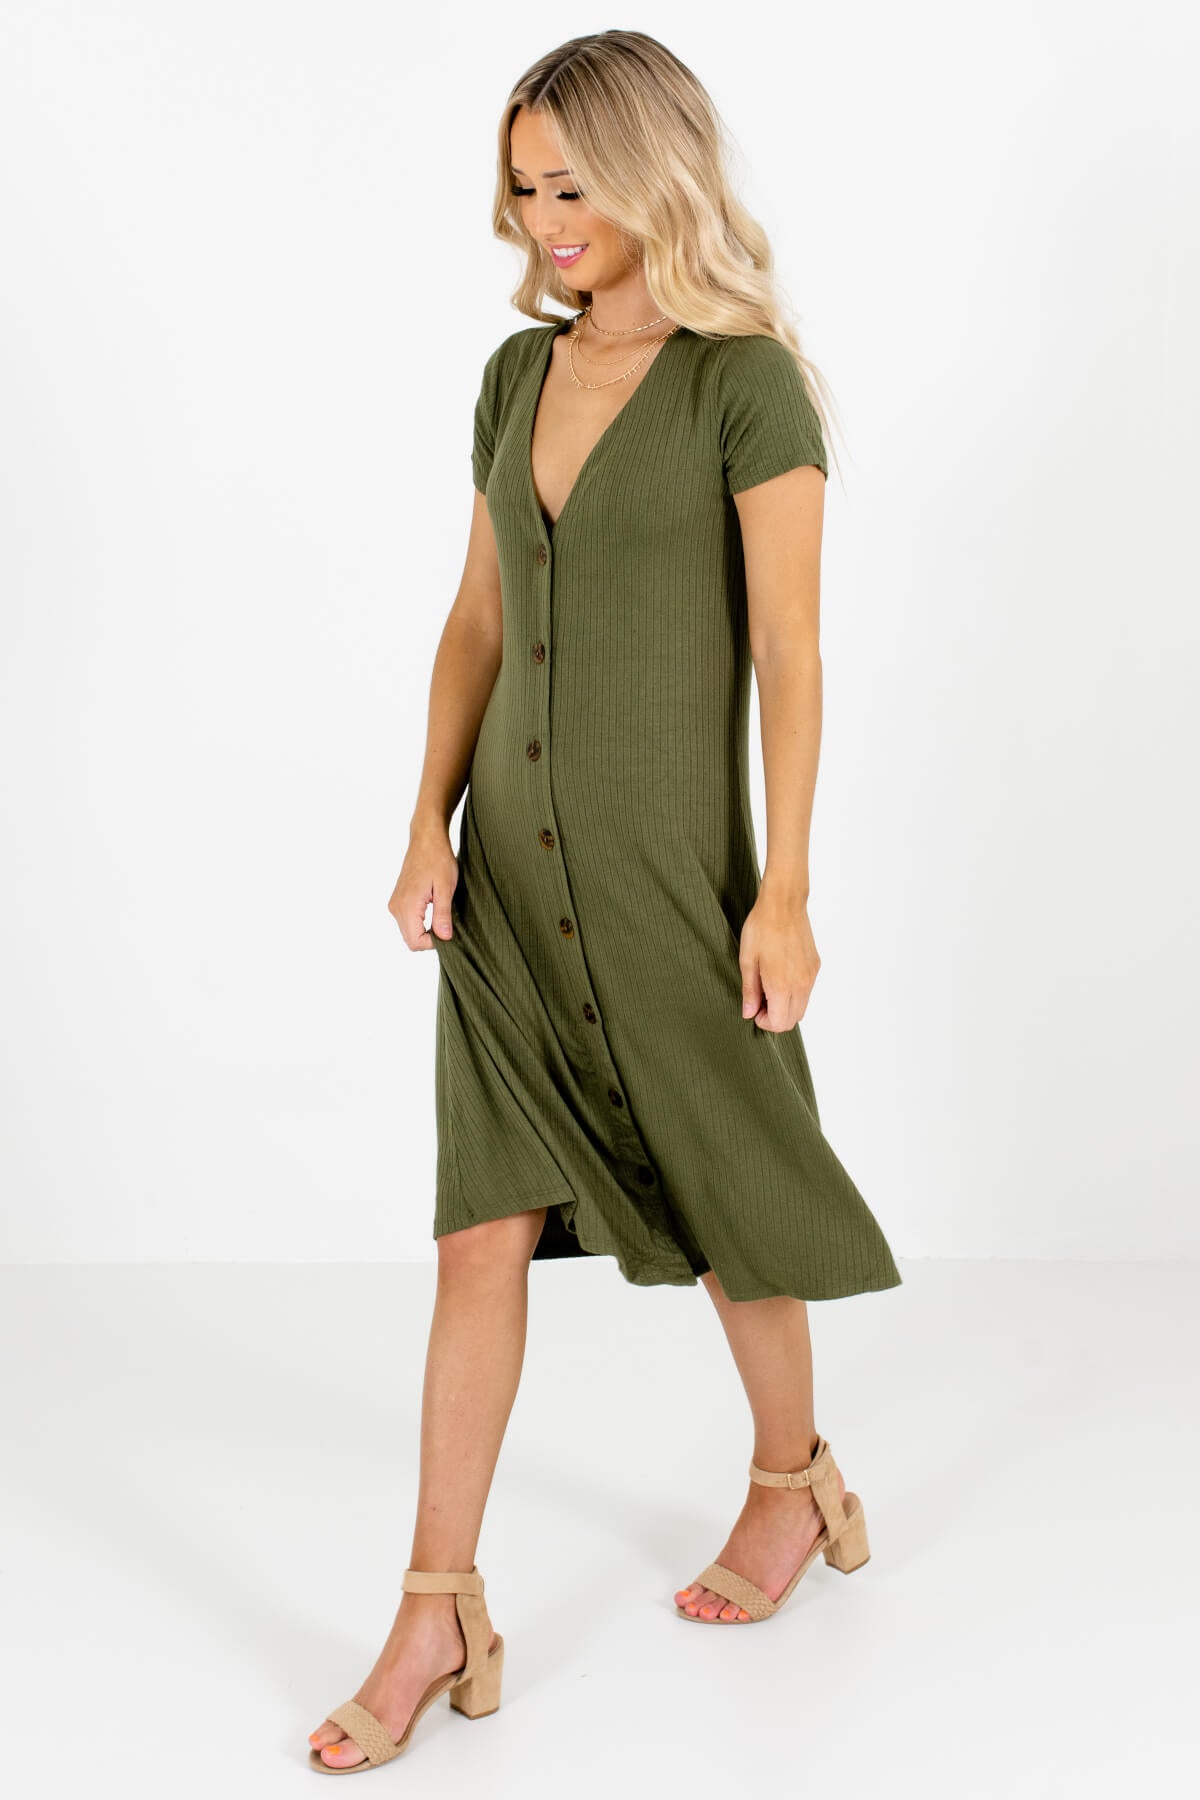 Olive Green Cute and Comfortable Boutique Midi Dresses for Women